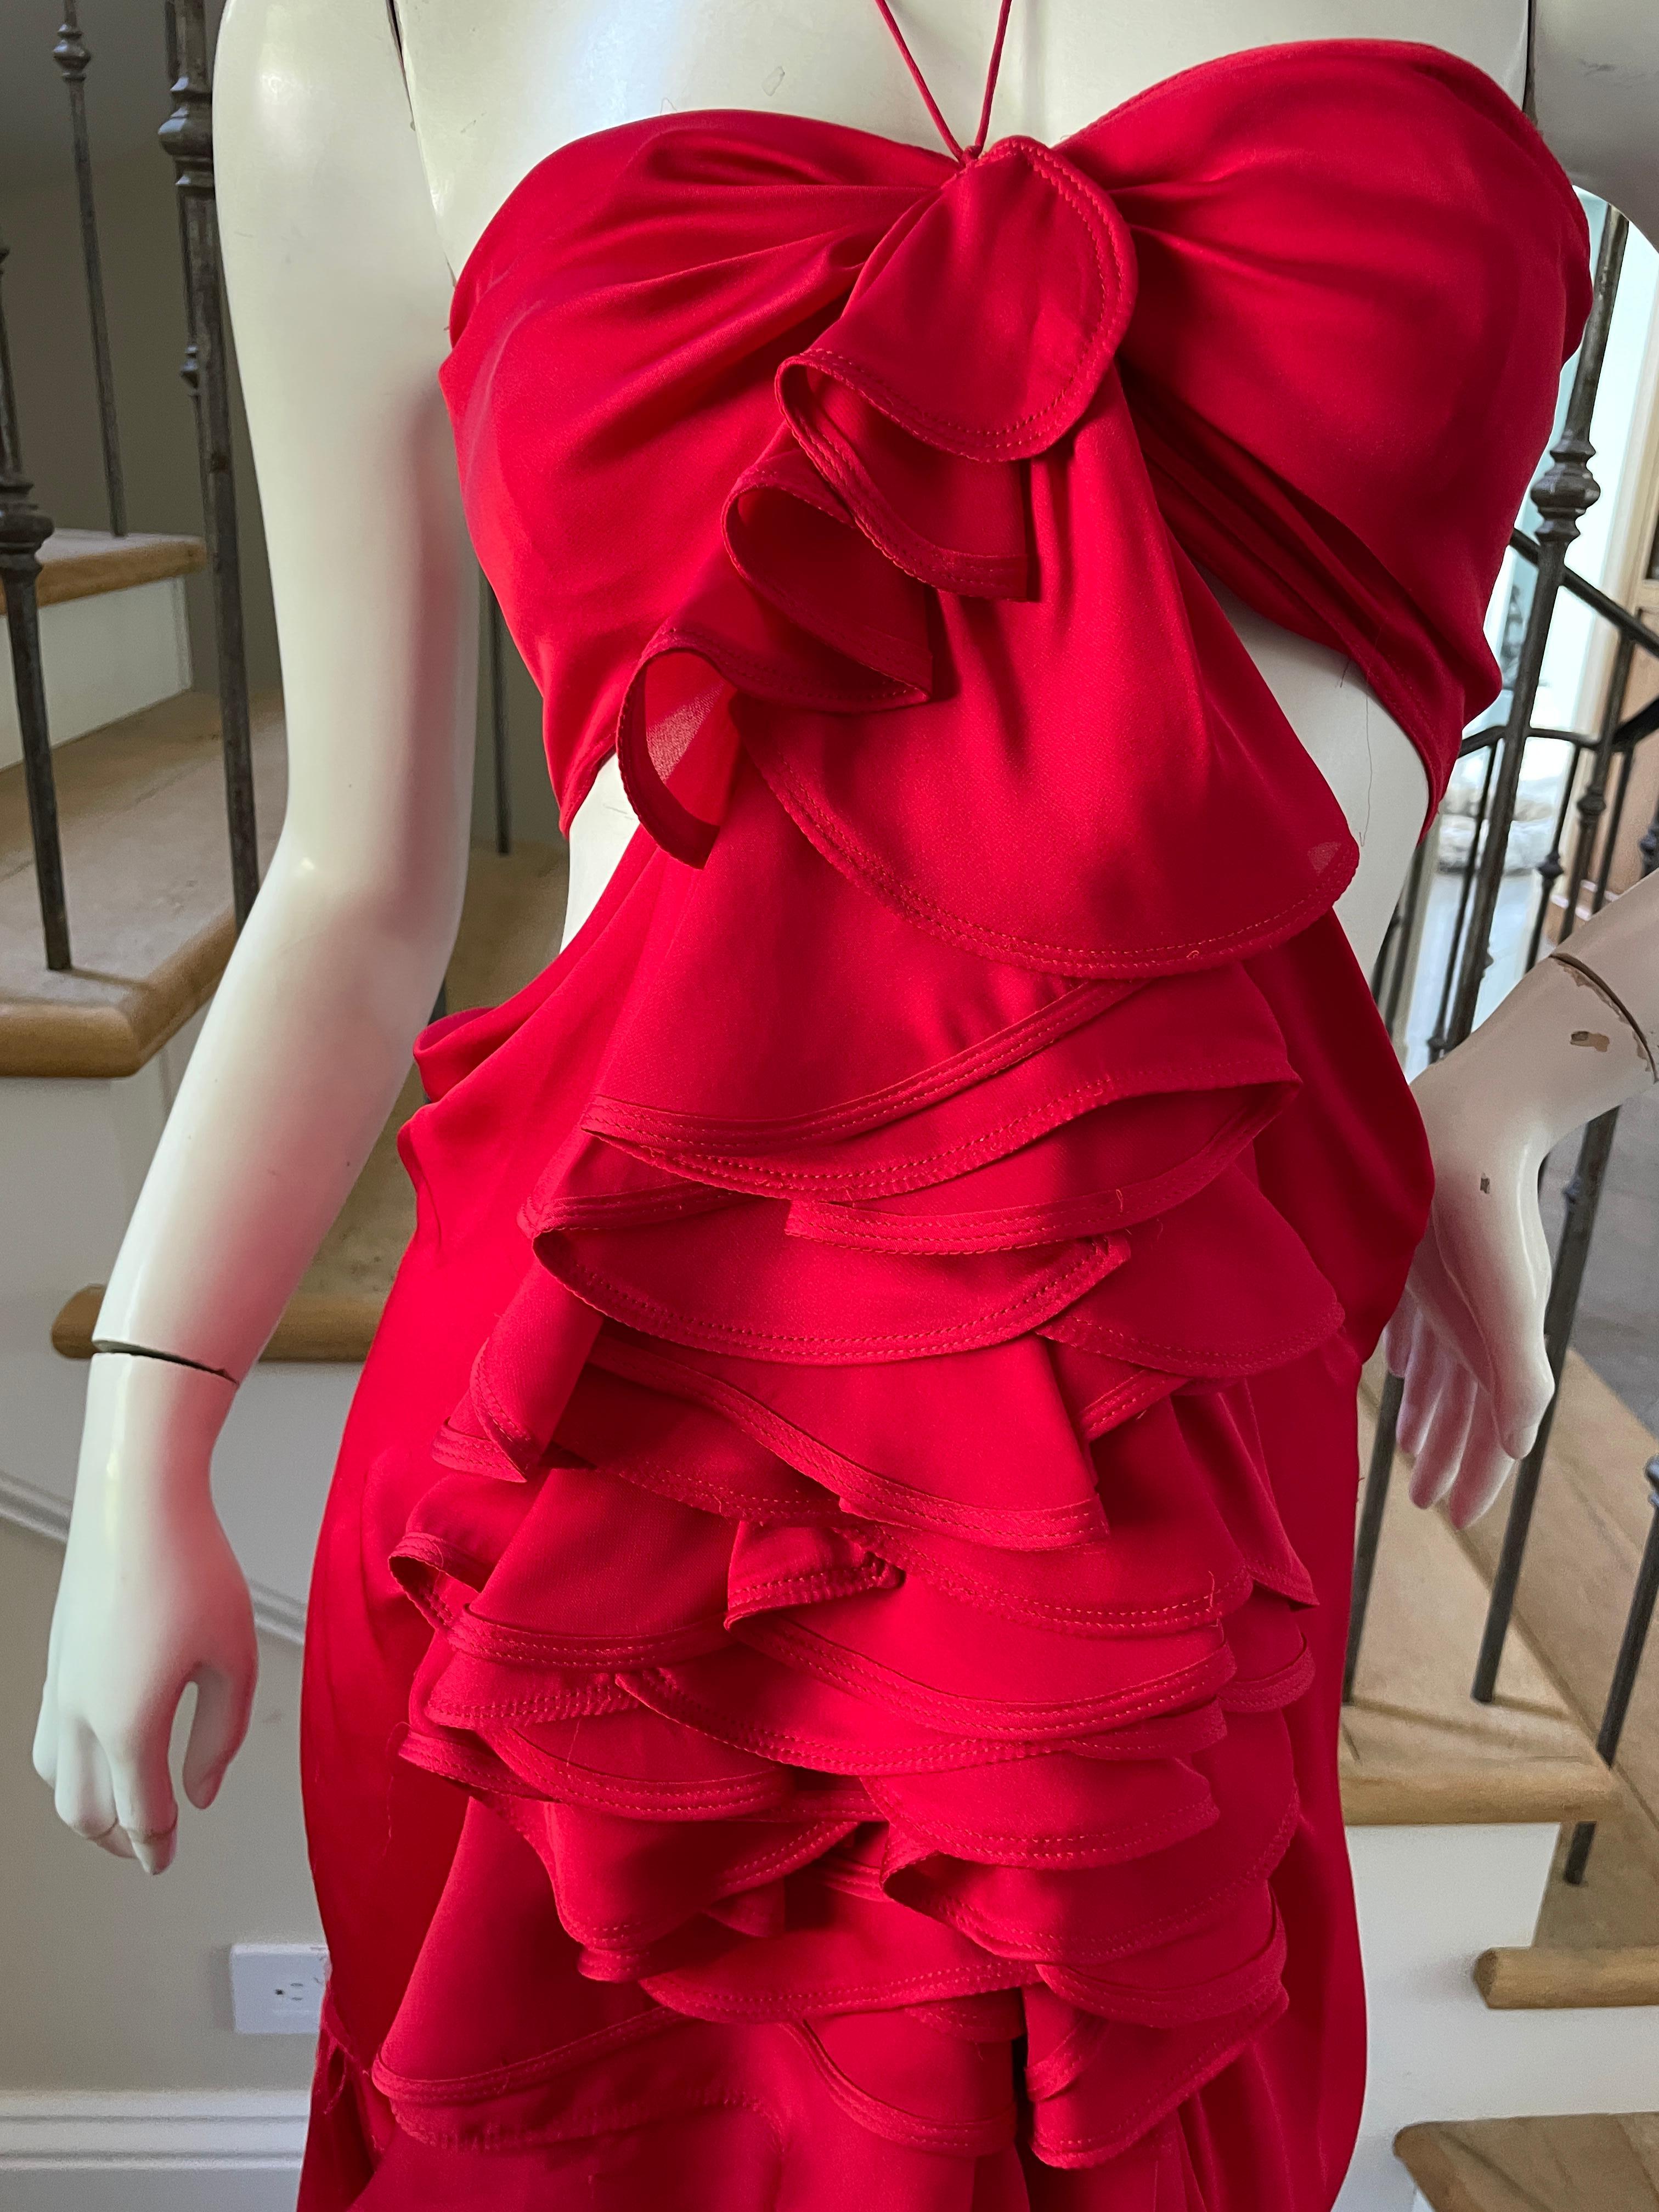 Yves Saint Laurent by Tom Ford 2003 Ruffled Red Silk Dress  For Sale 9